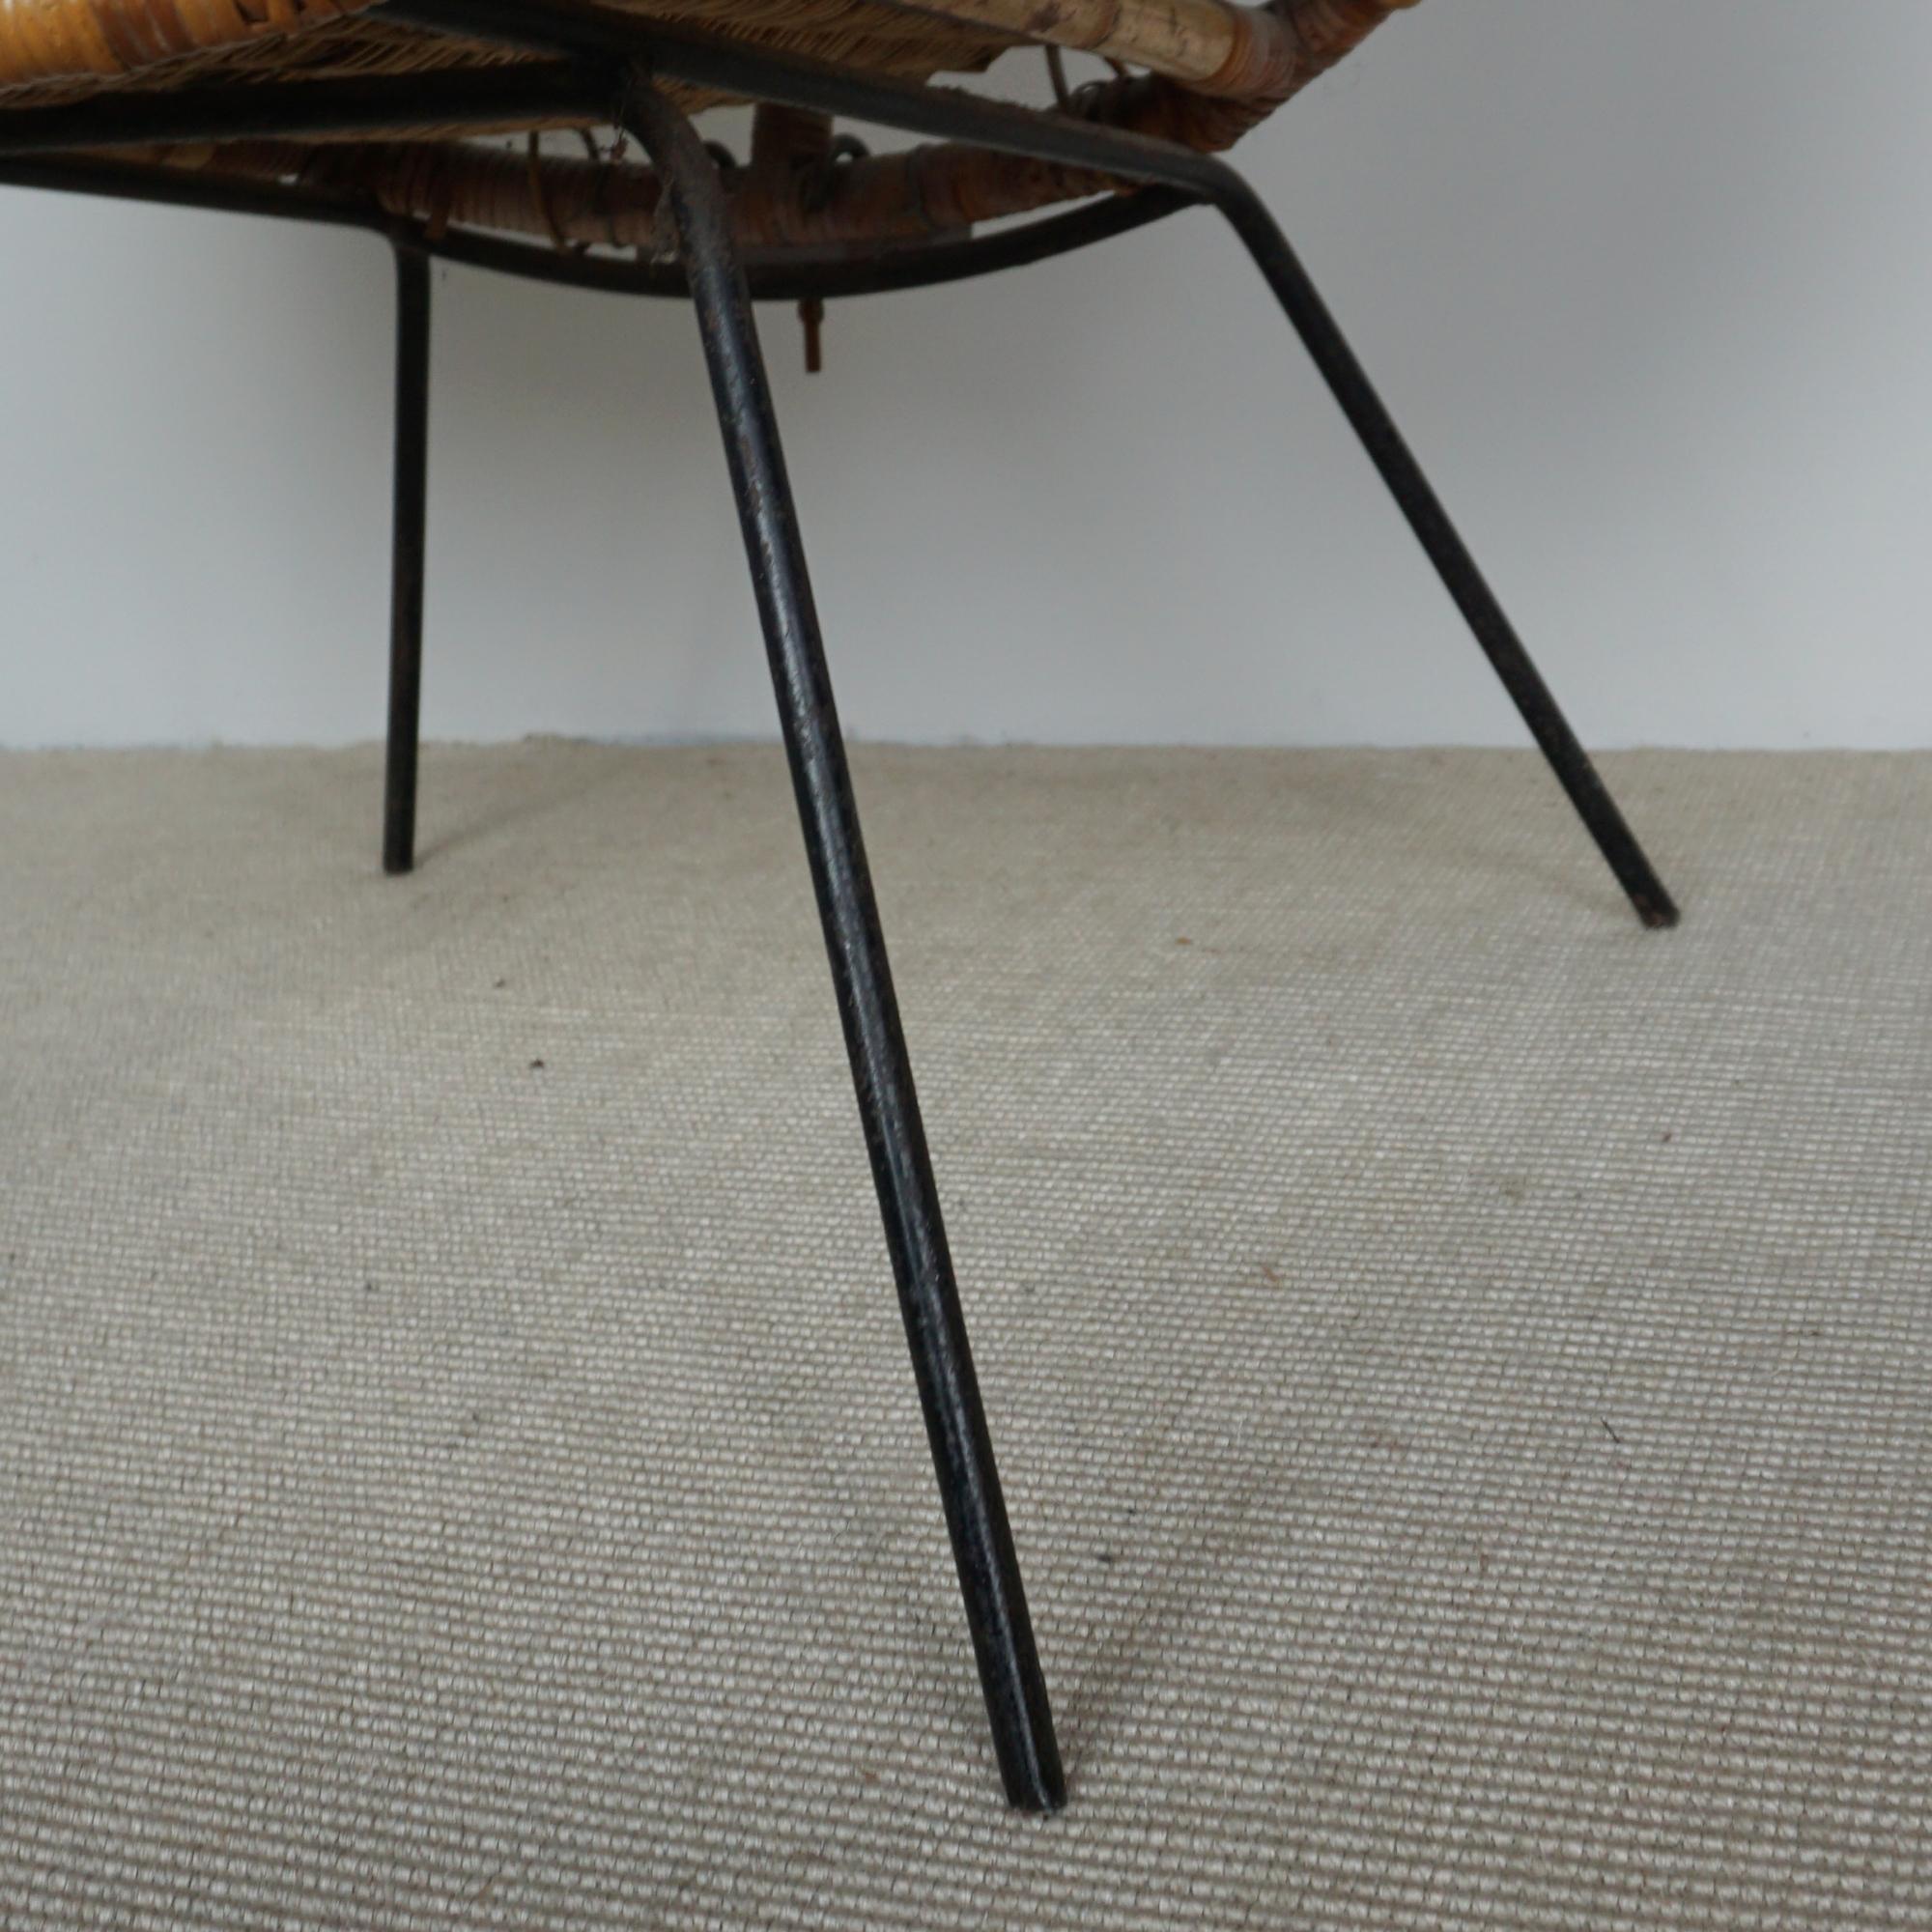 Picasso's Wicker and Steel Chair from the Madoura Collection Circa 1960 For Sale 4